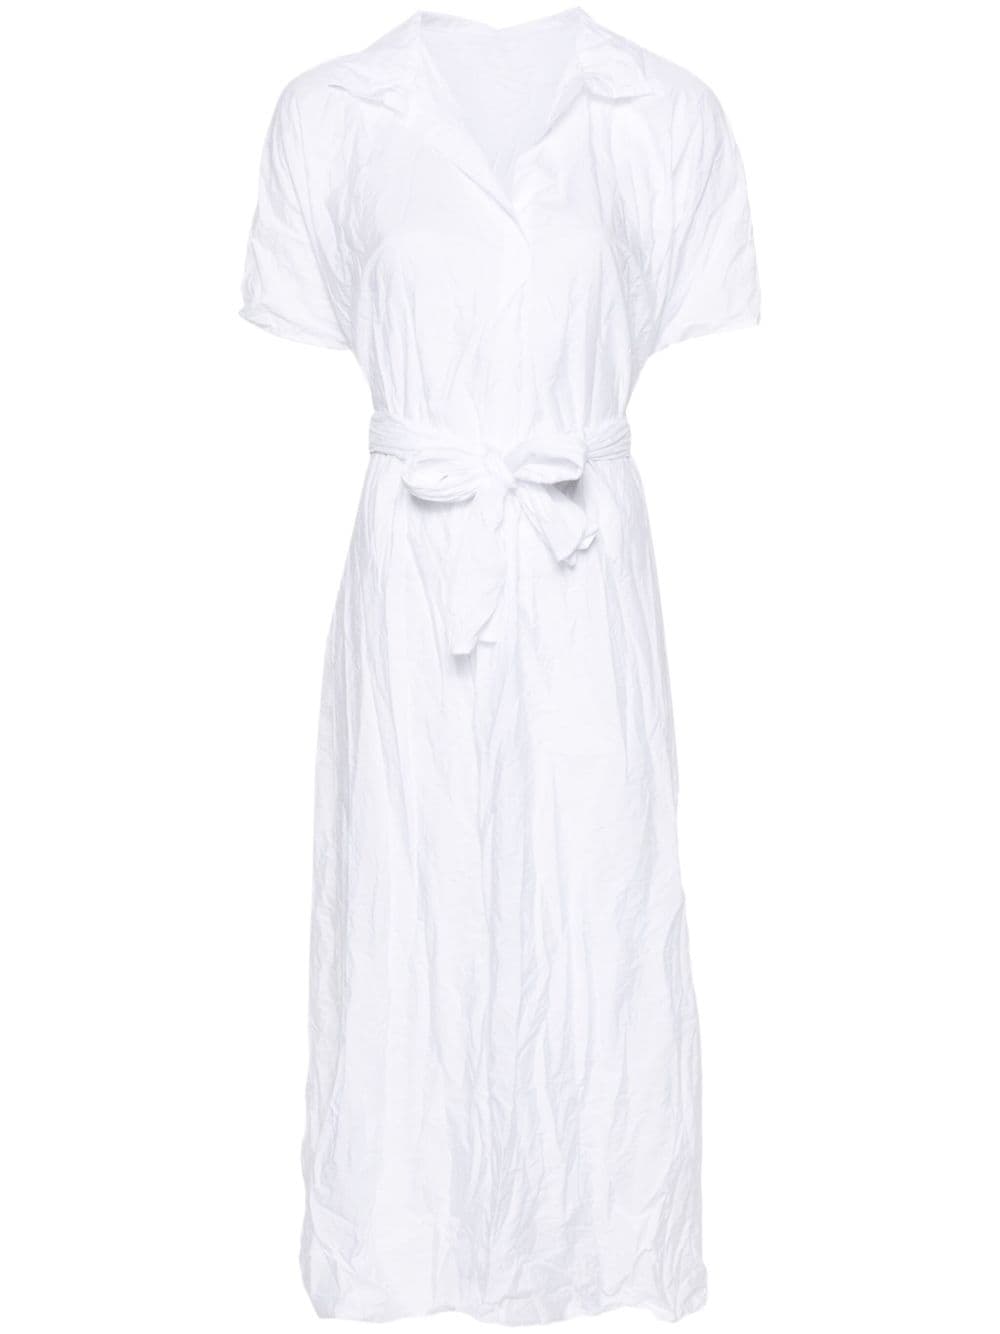 Shop Daniela Gregis White Cotton Short Dress With Spread Collar And Batwing Sleeves